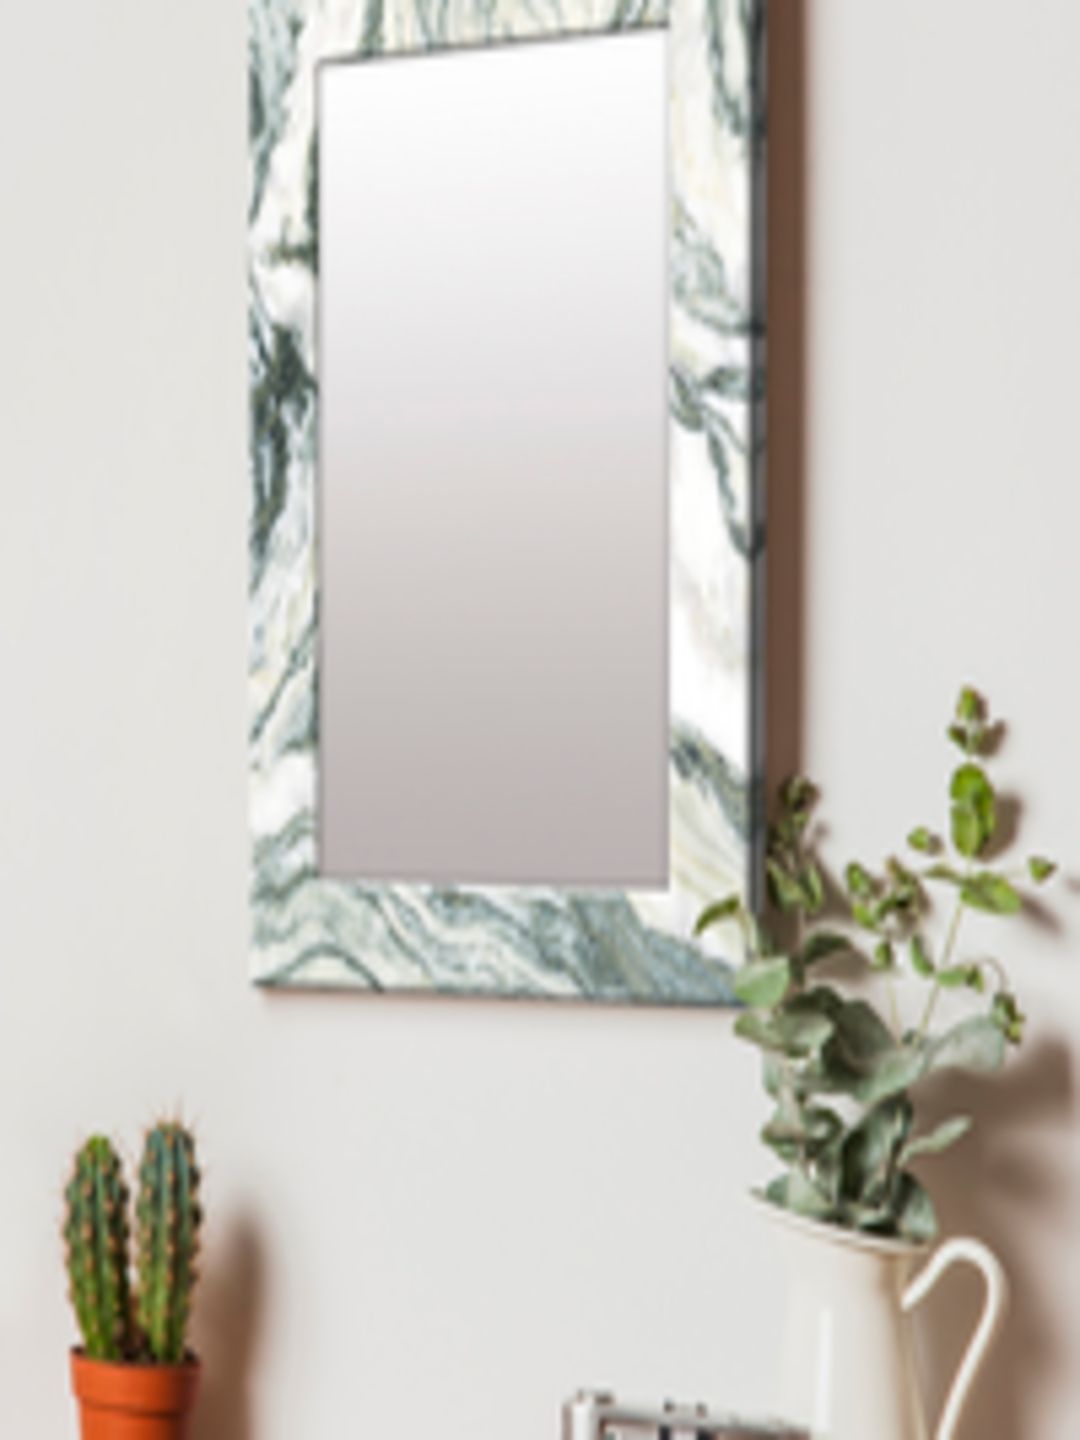 Buy 999Store White & Grey Printed Mdf Wall Mirror – Mirrors For Unisex For Steel Gray Wall Mirrors (View 3 of 15)